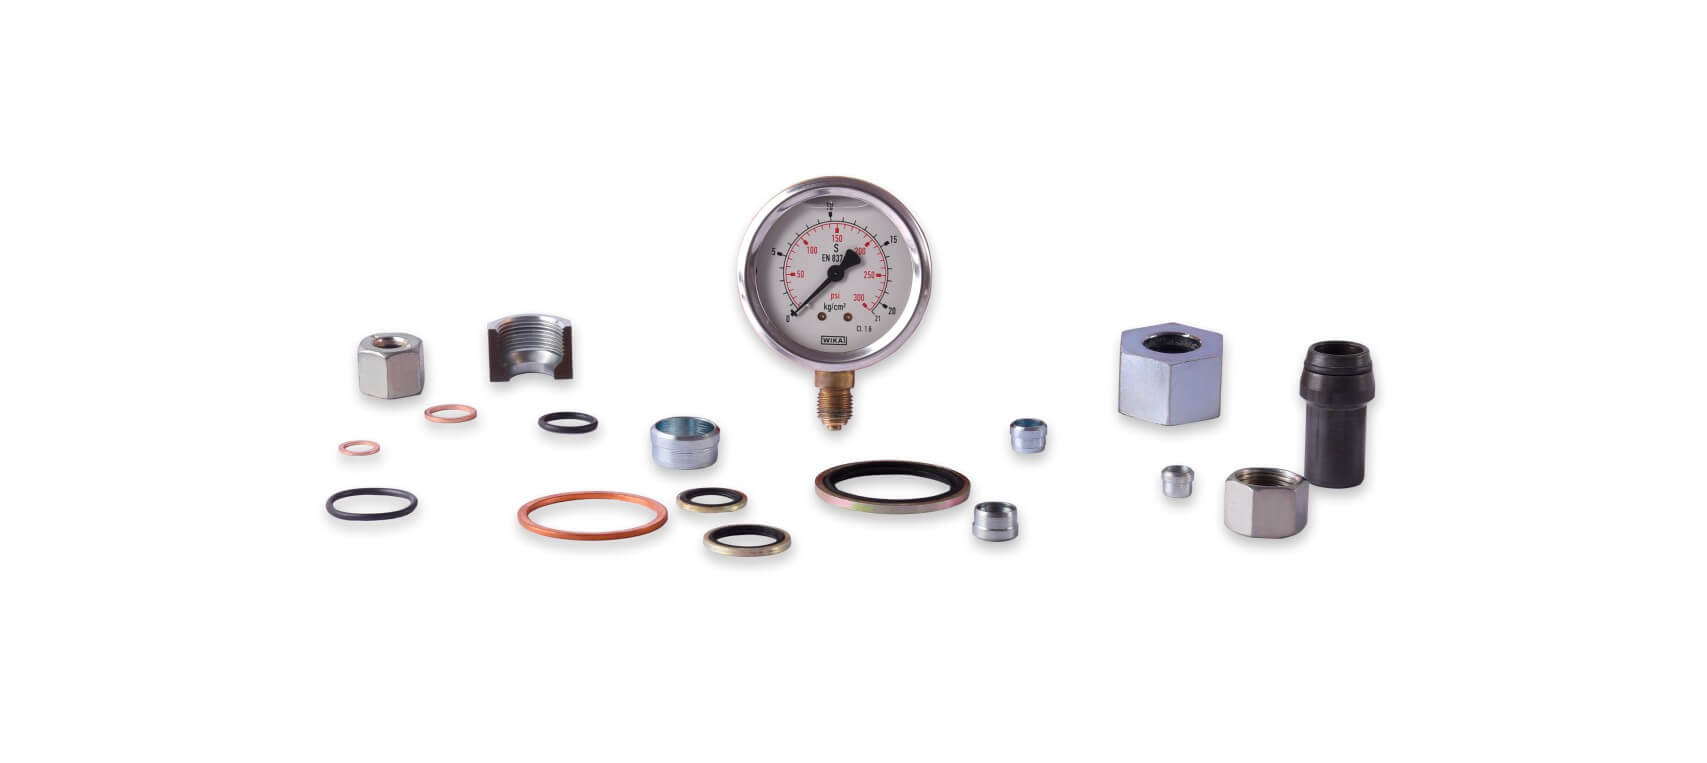 Hydraulic Accessories and Other Products